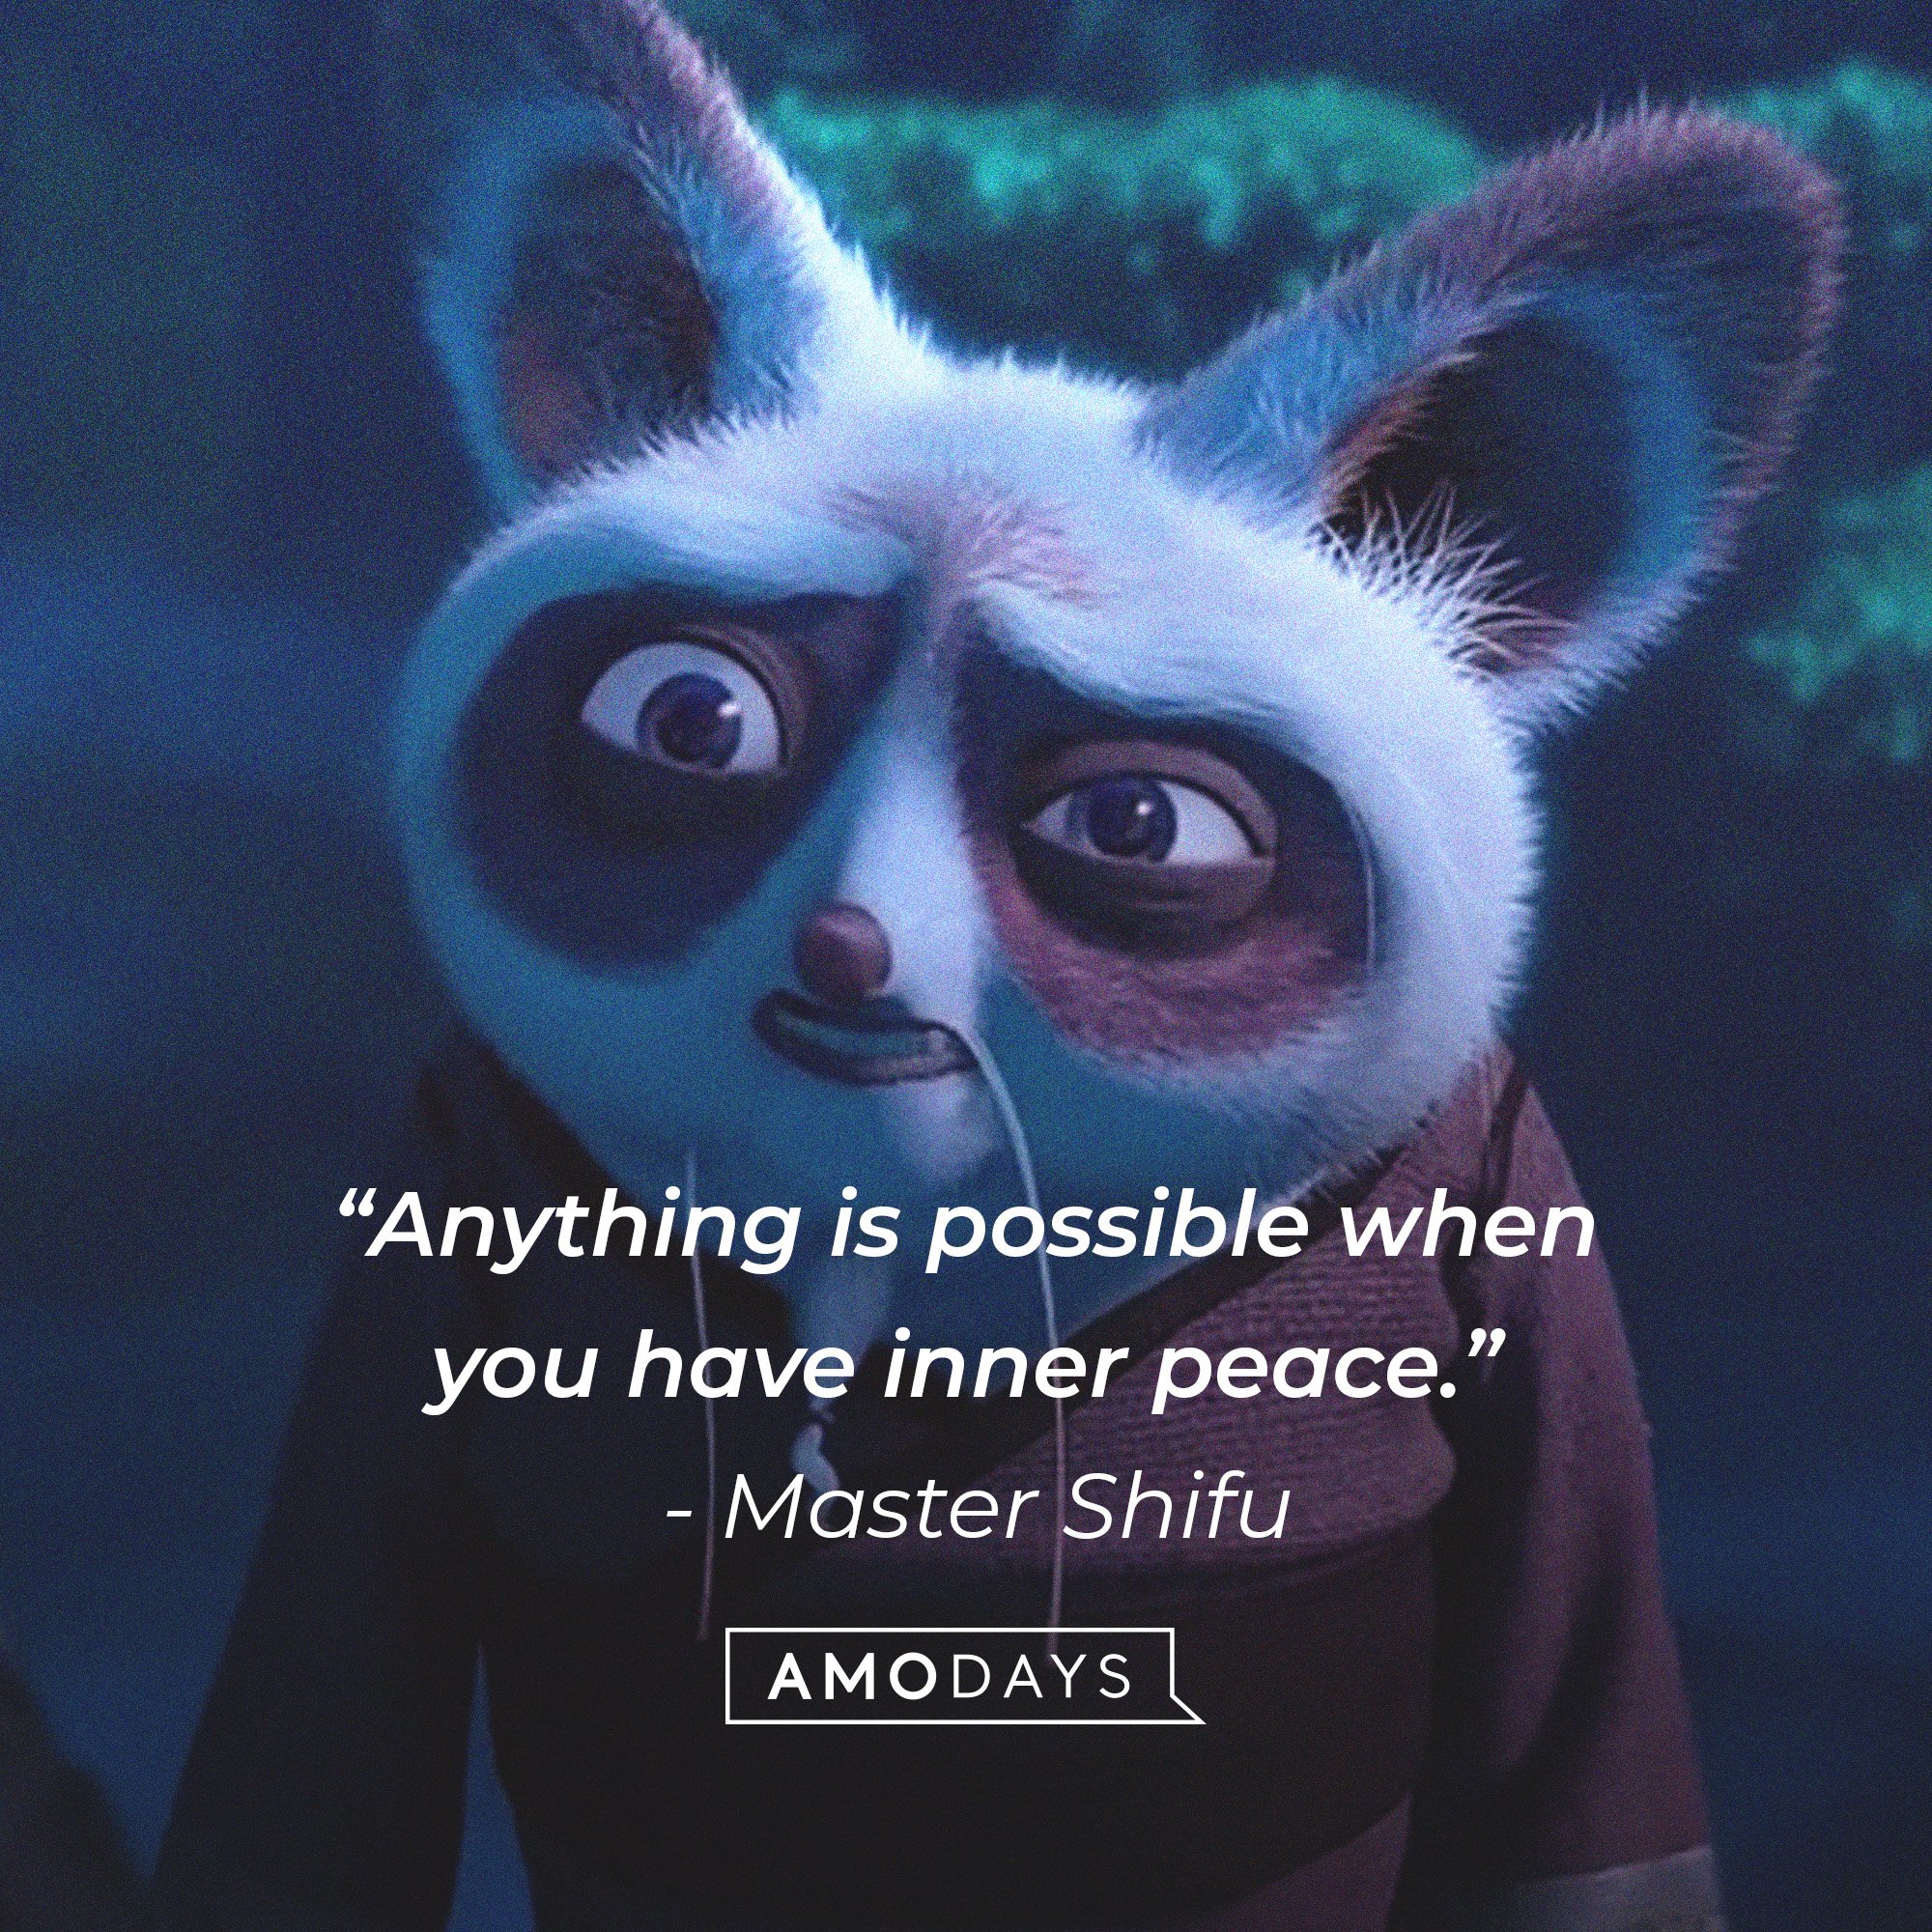  Master Shifu’s quote: “Anything is possible when you have inner peace.” | Image: AmoDays